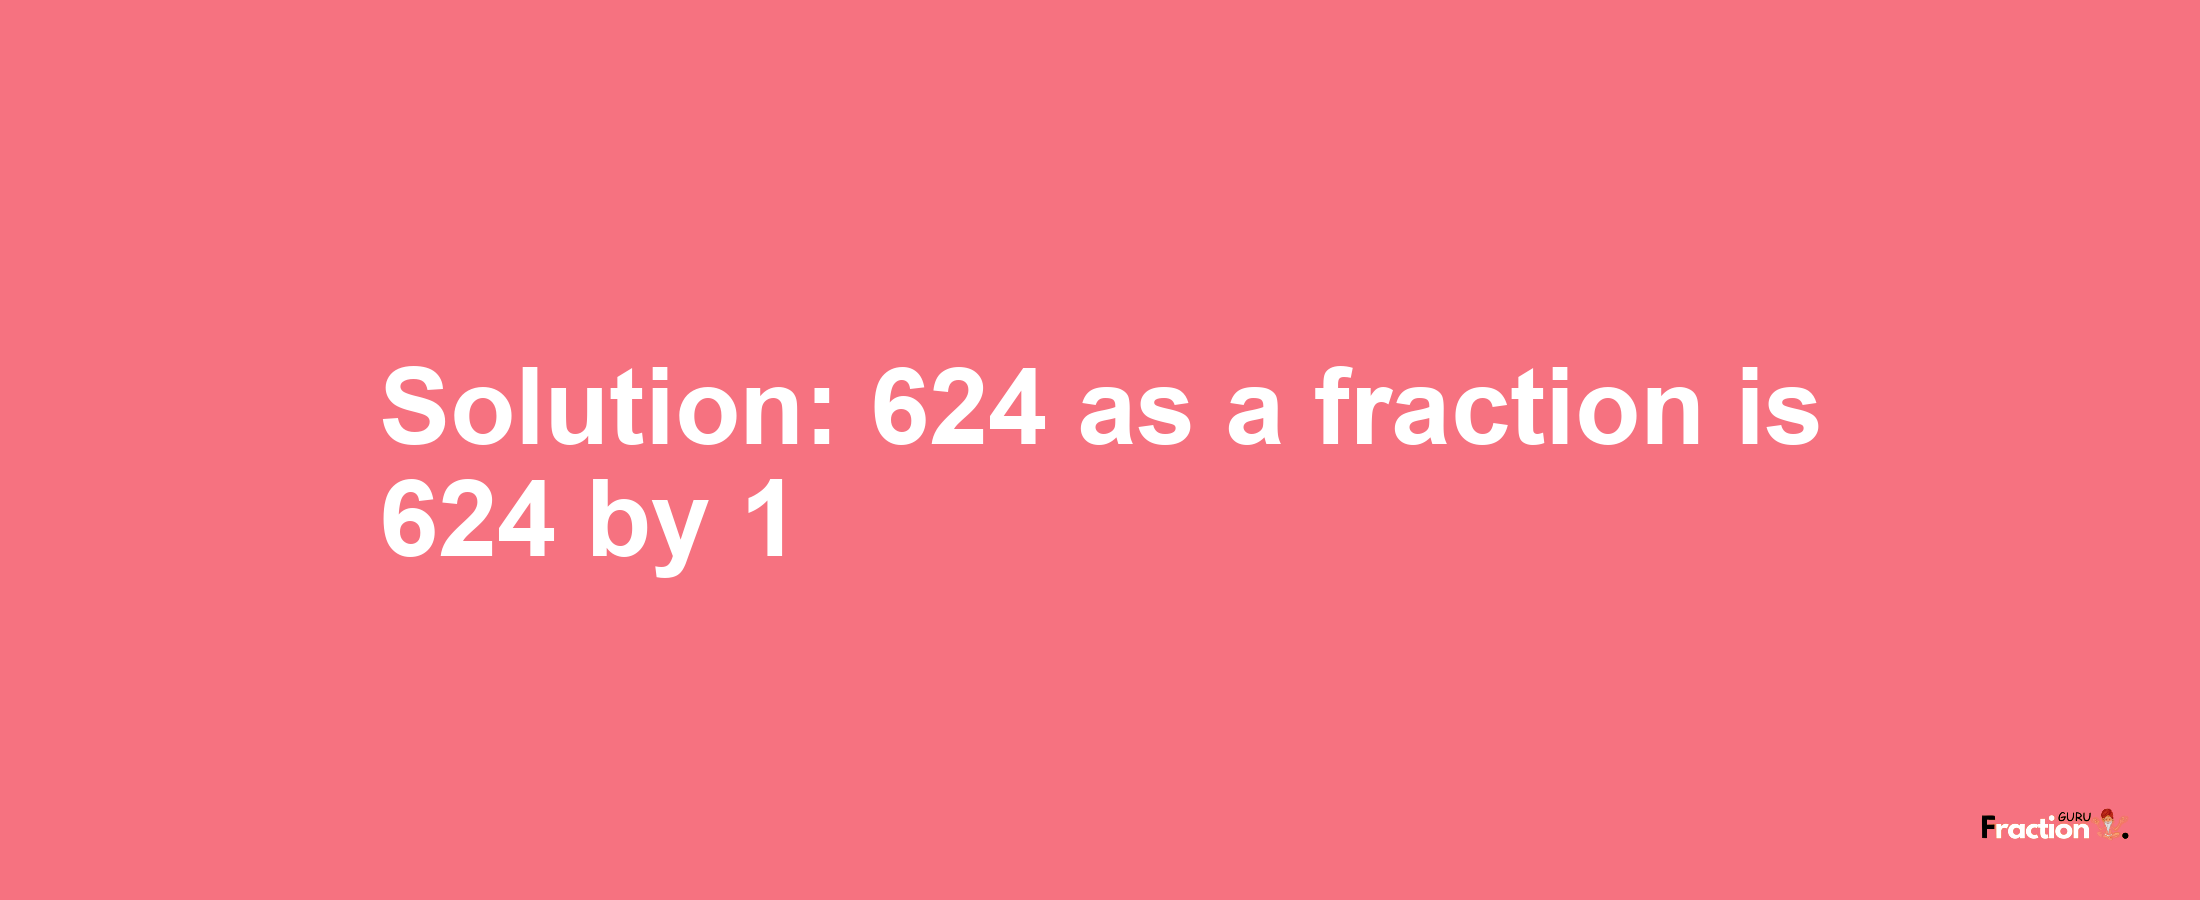 Solution:624 as a fraction is 624/1